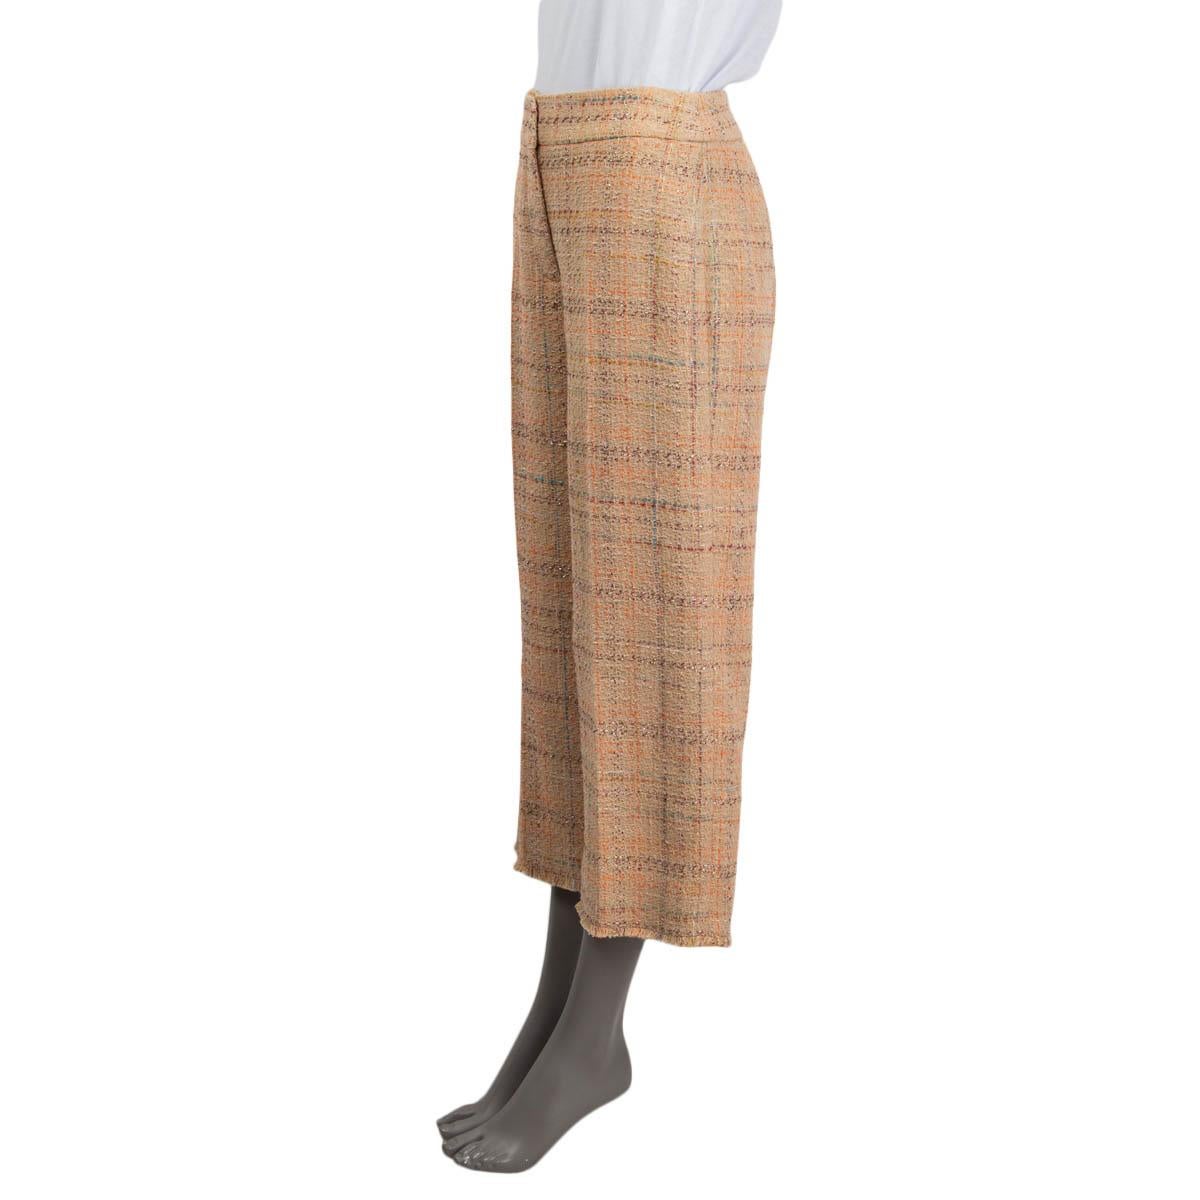 100% authentic AKRIS Punto cropped pants in camel, orange, turquoise and purple cotton (46%), polyester (37%), acrylic (13%), nylon (3%) and viscose (1%). Feature a high-waist silhouette and fringed cuffs. Close with a concealed zipper, a button and